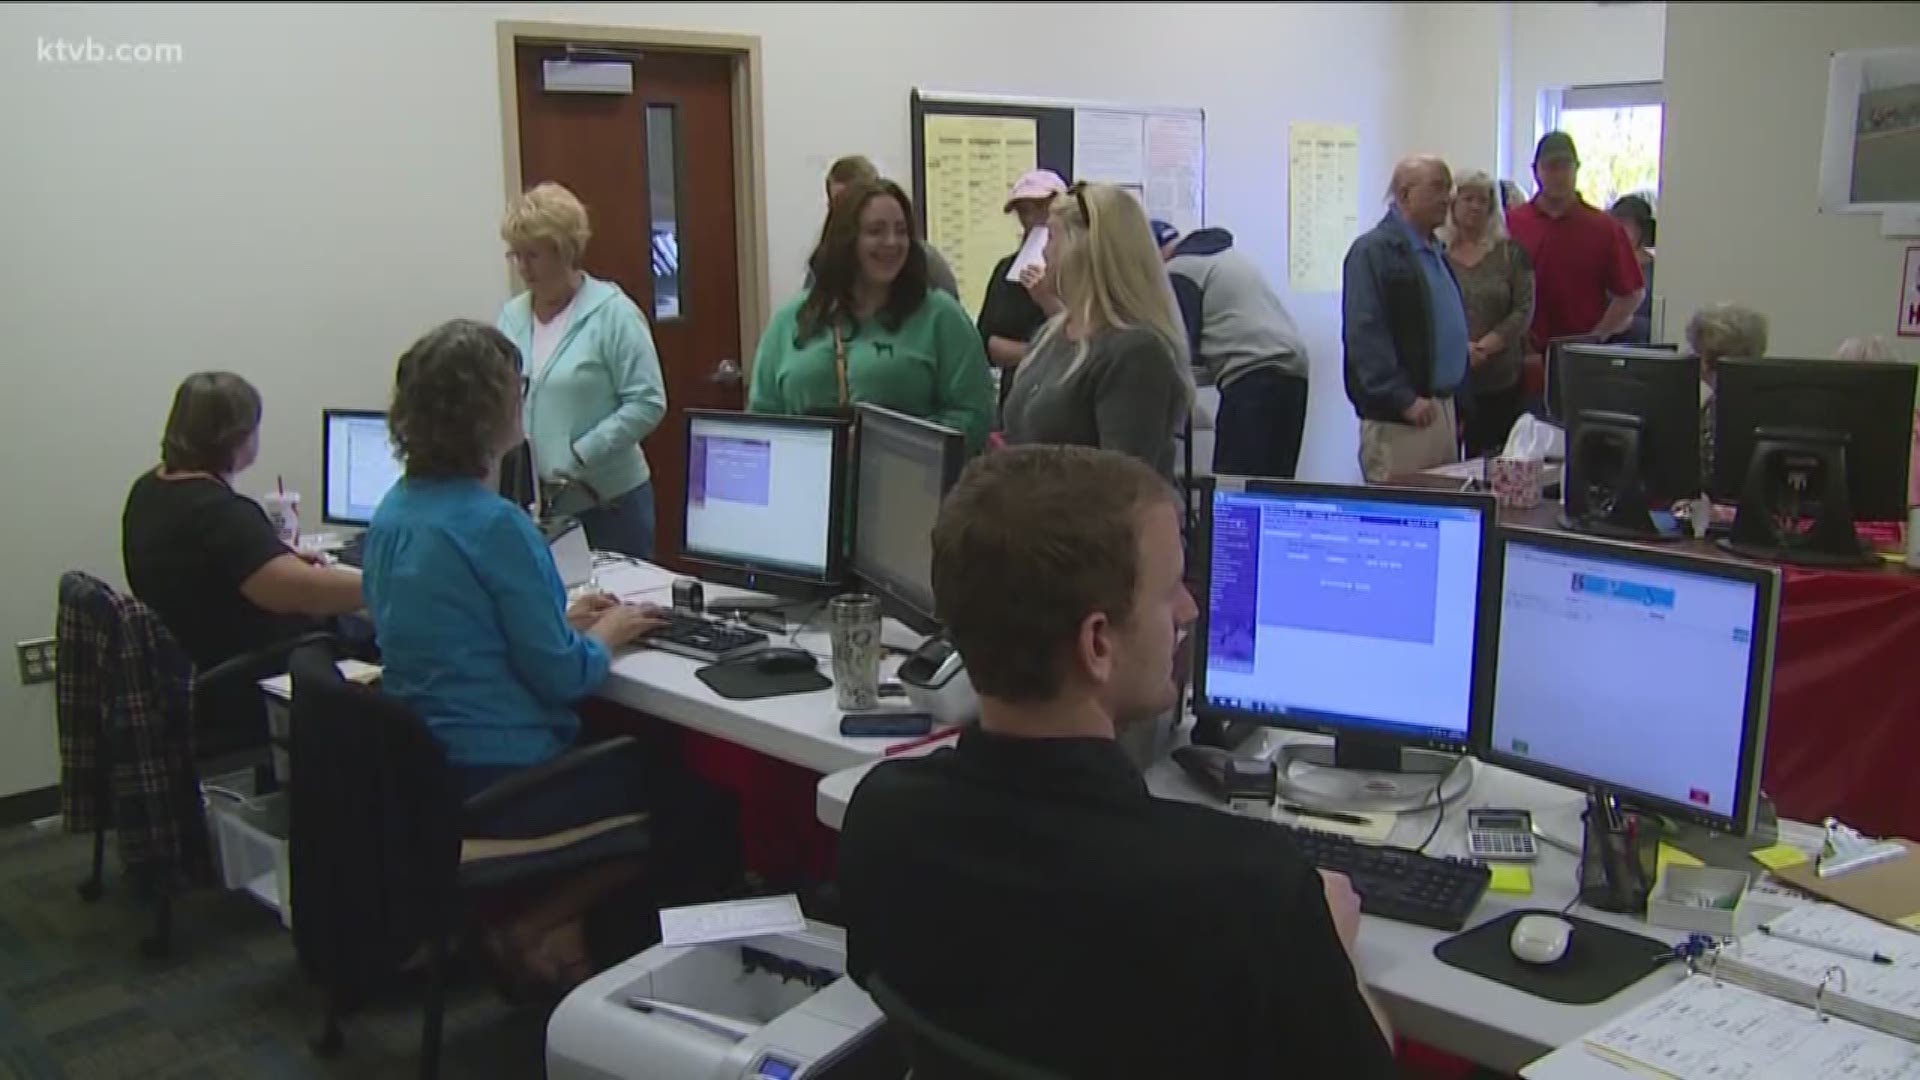 The Ada County Clerk's office says they've seen an uptick in millennials and women voters.